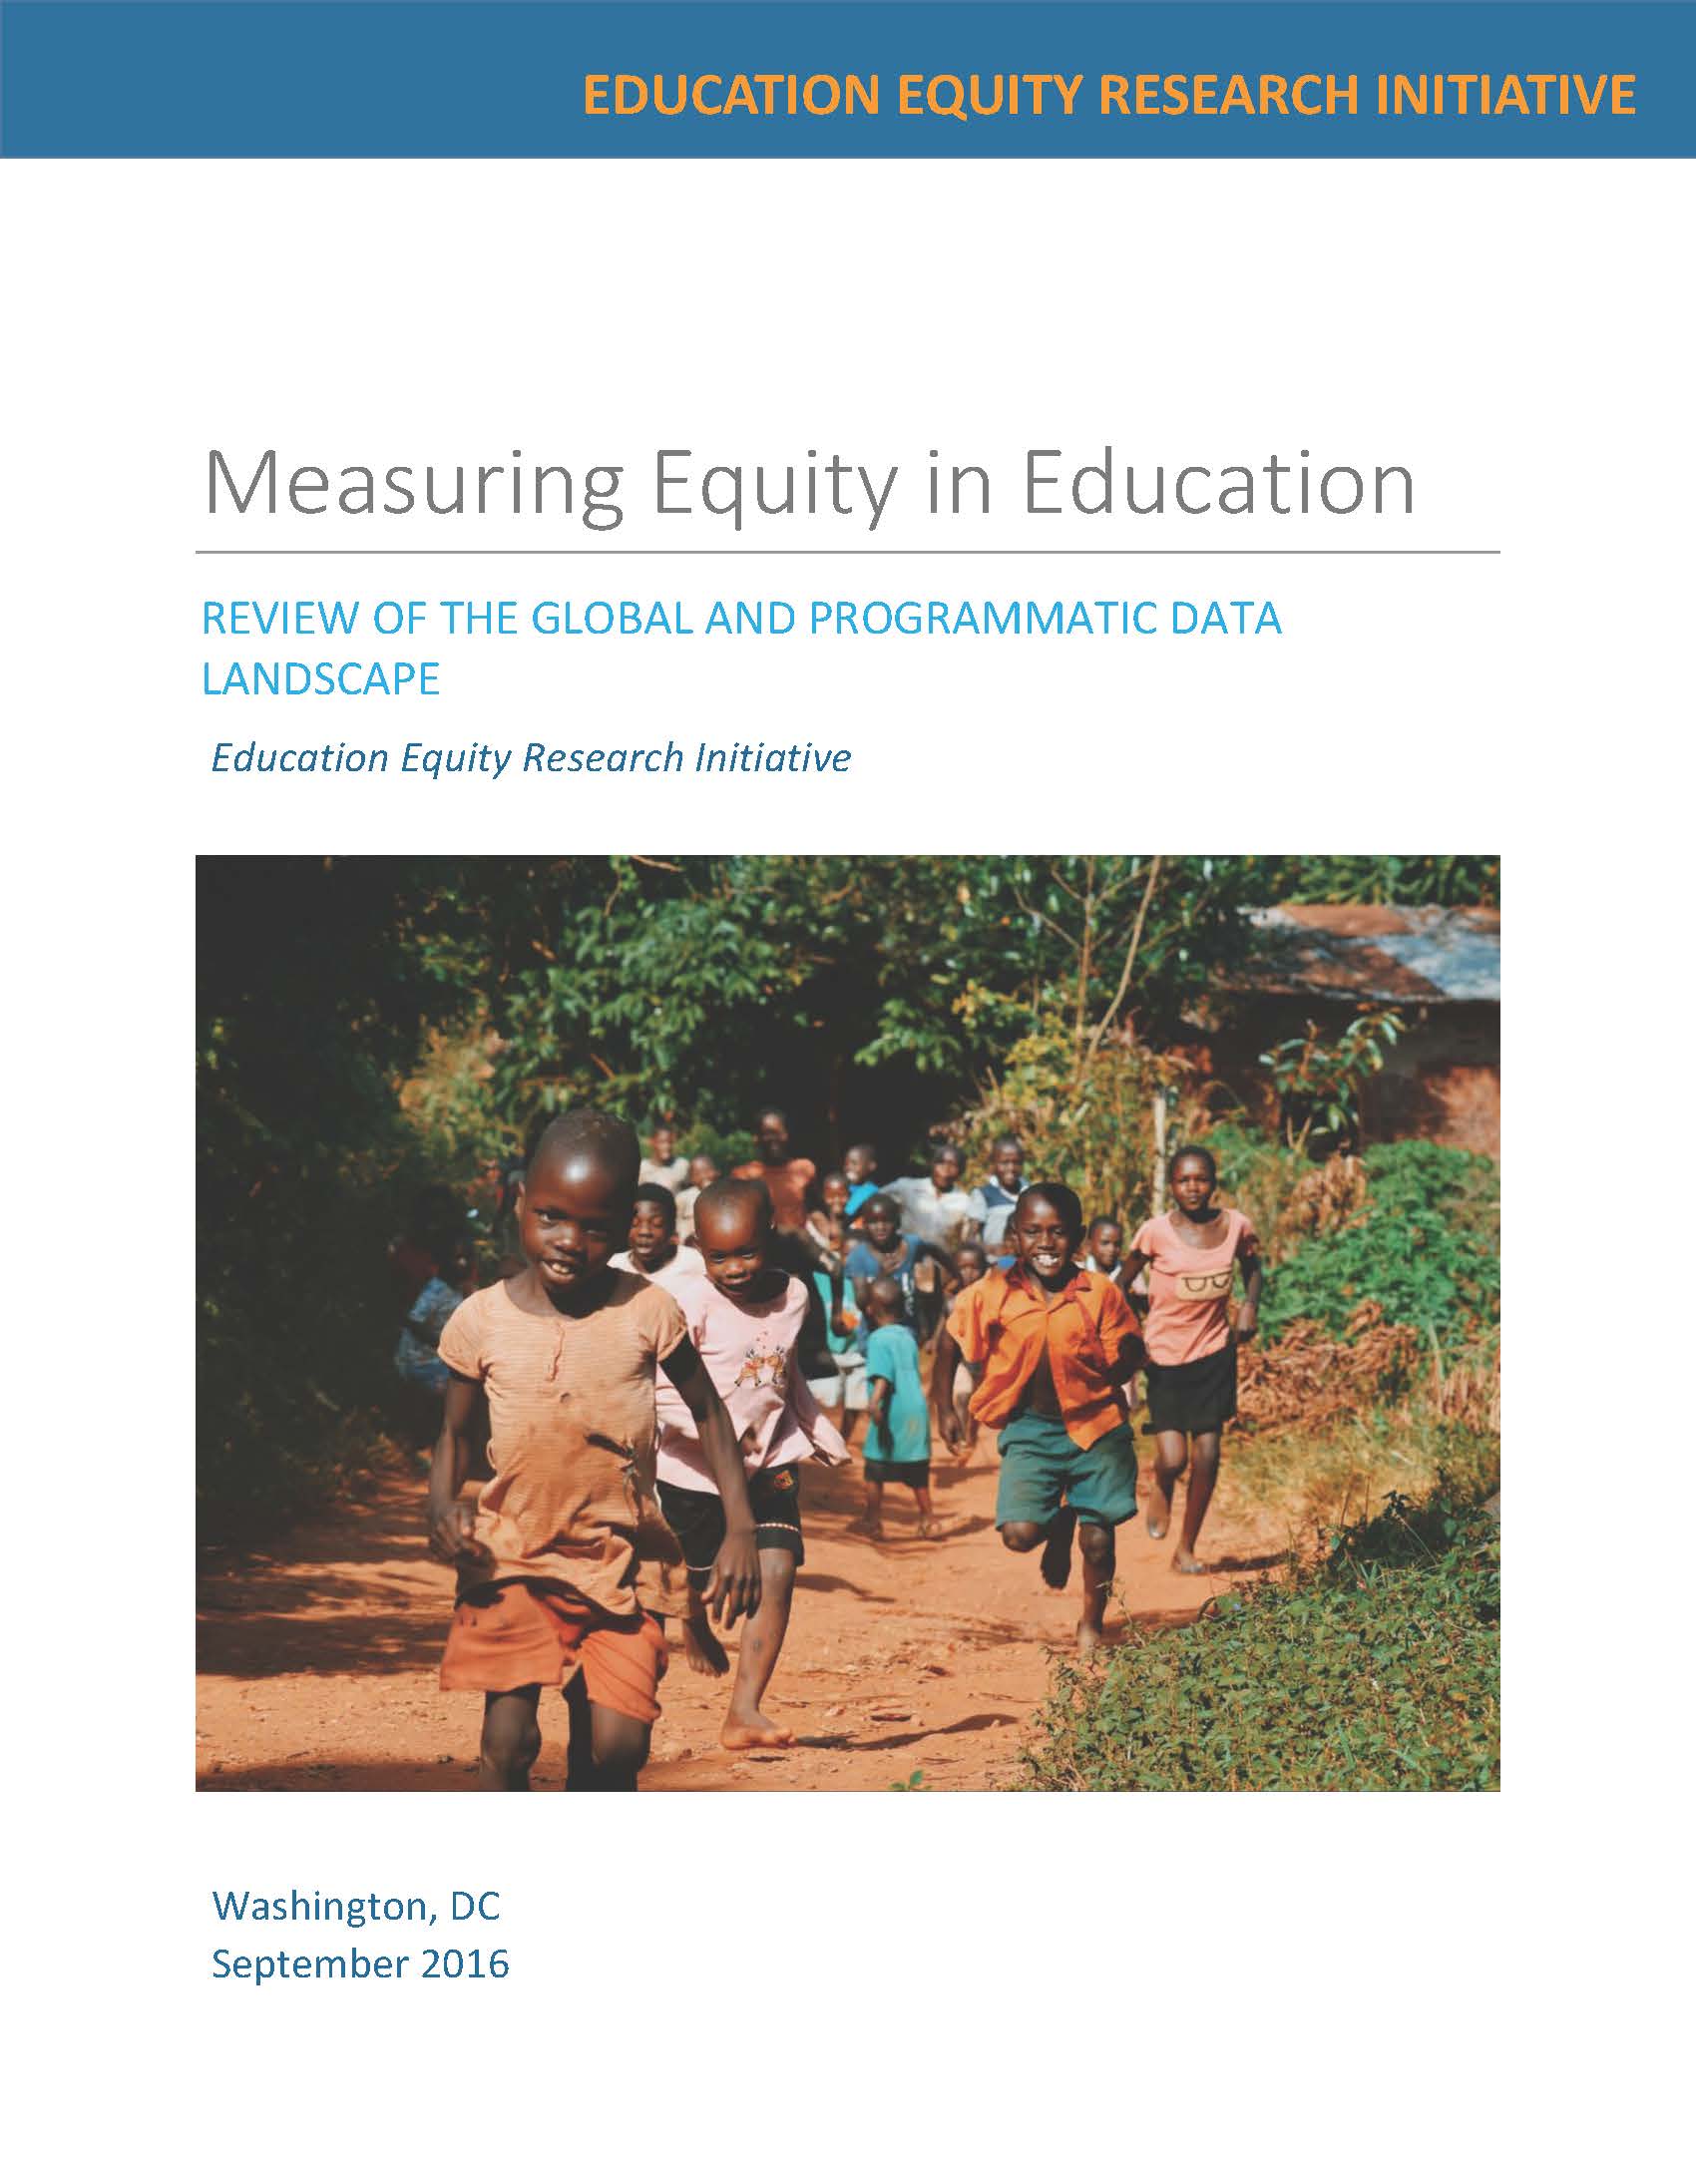 "Measuring Equity in Education, Review of the global and programmatic data landscape,  Education Equity Research Initiative"